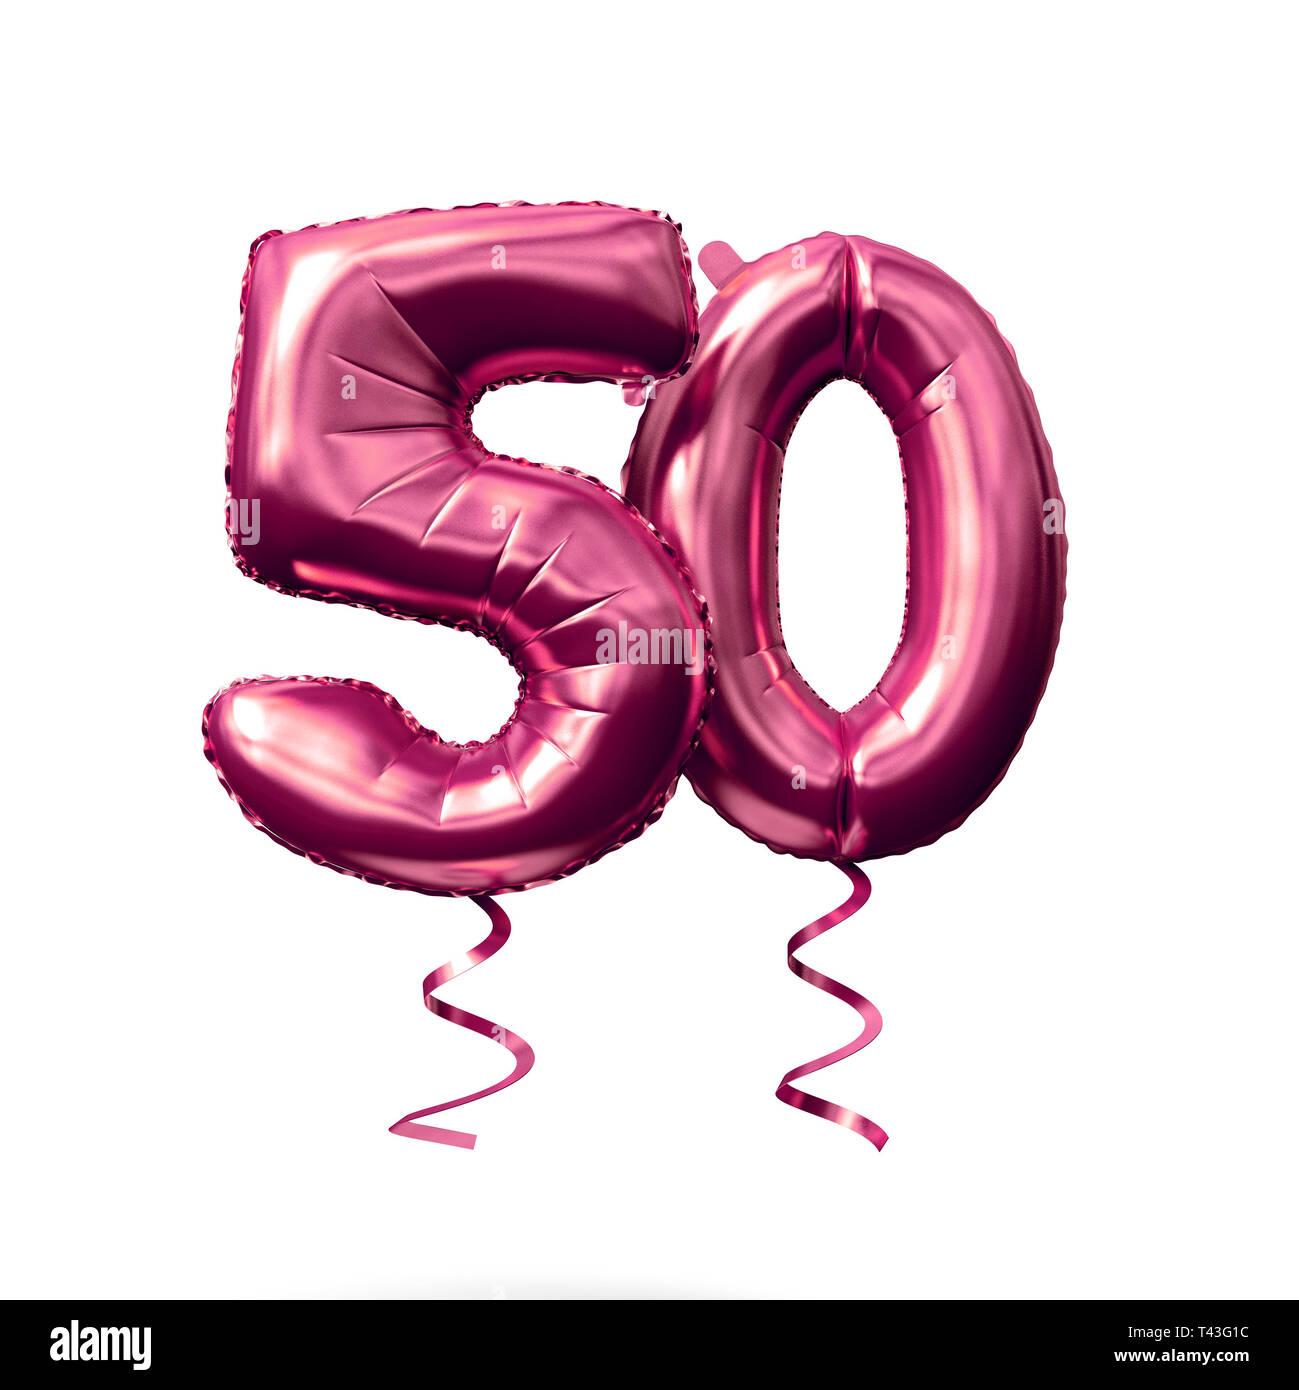 50th Birthday Party Cut Out Stock Images & Pictures - Alamy